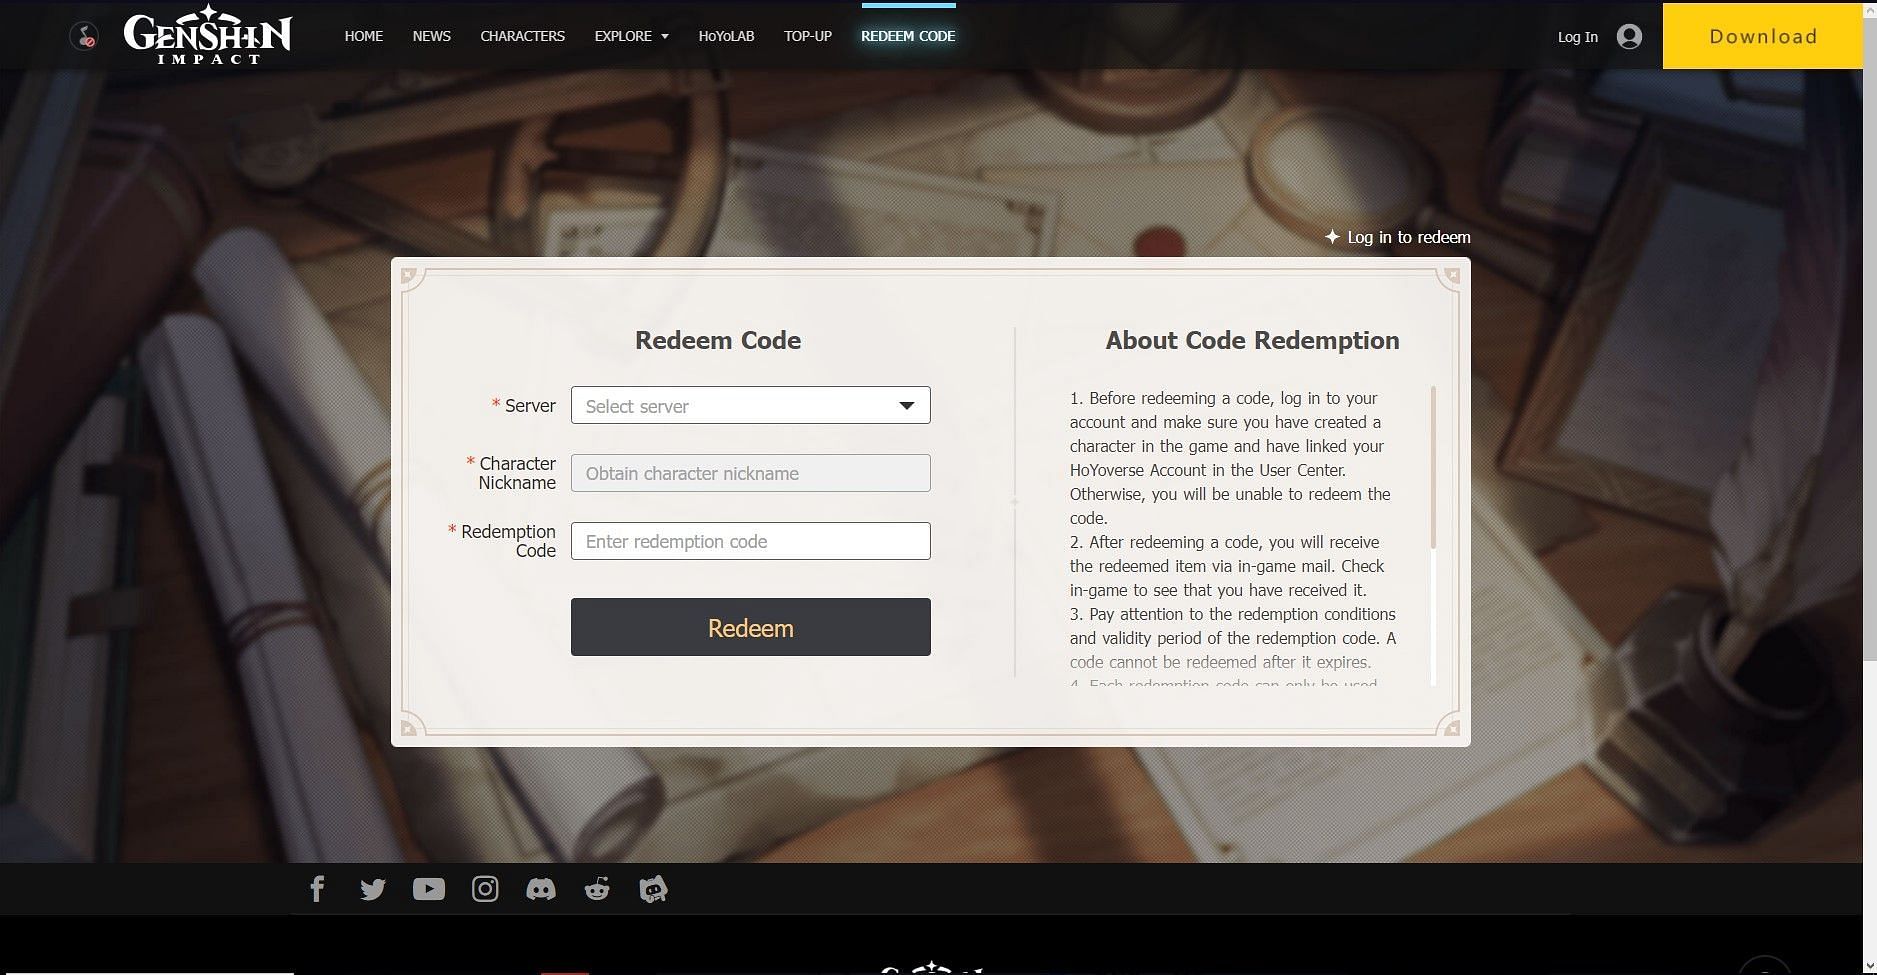 Code redemption official webpage (Image via HoYoverse)